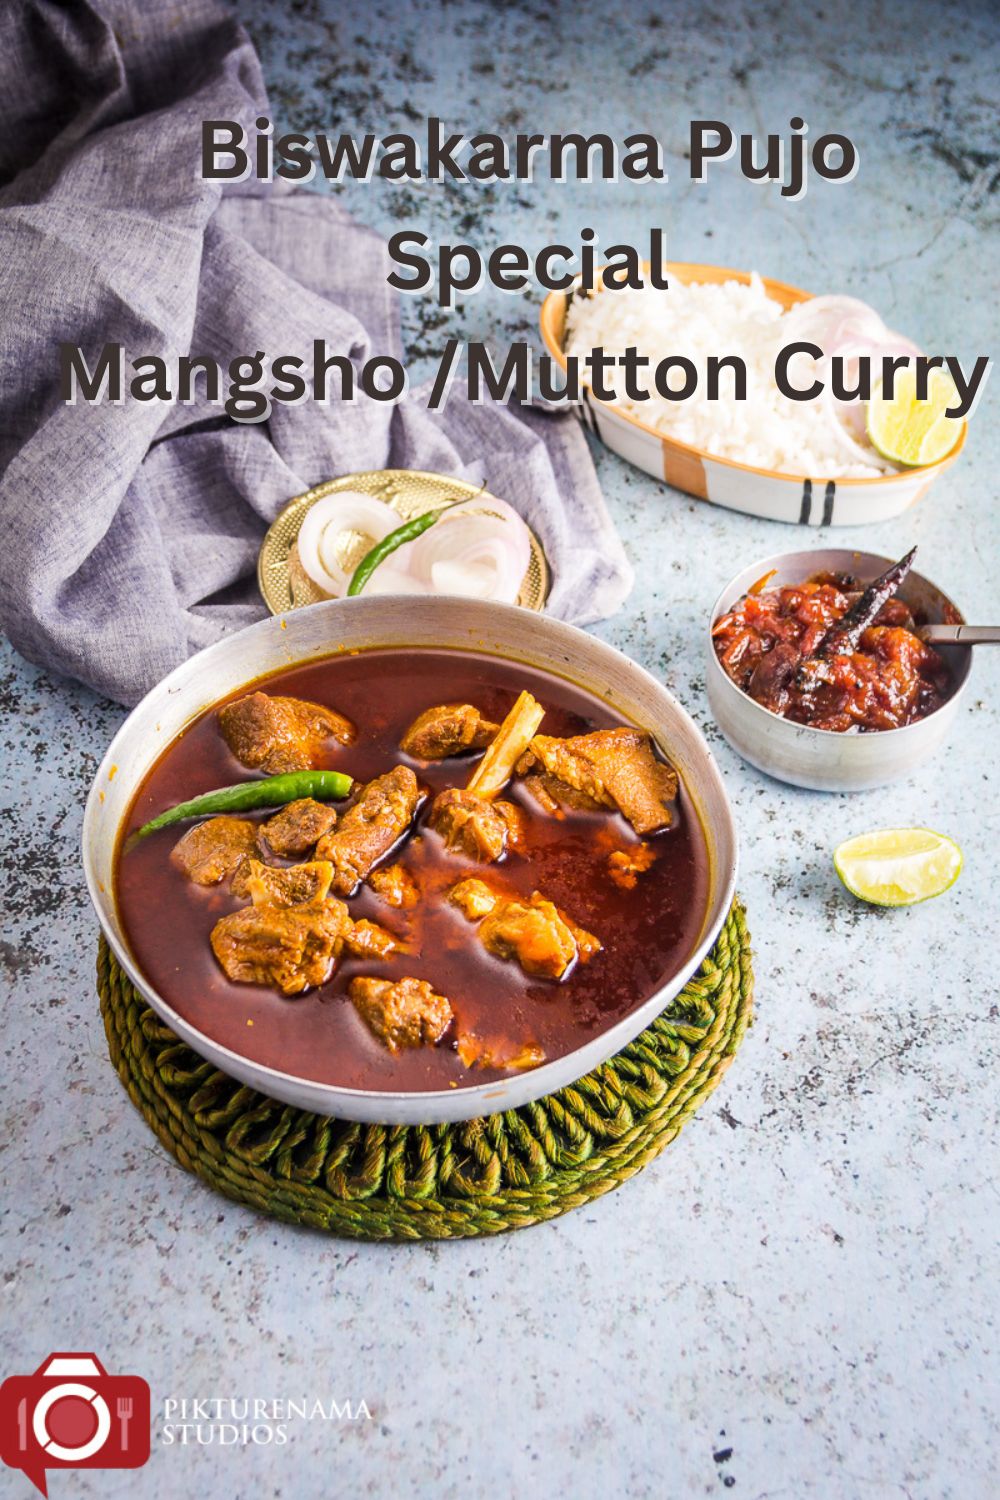 Biswakarma Pujo Special Mangsho /Mutton Curry - pi